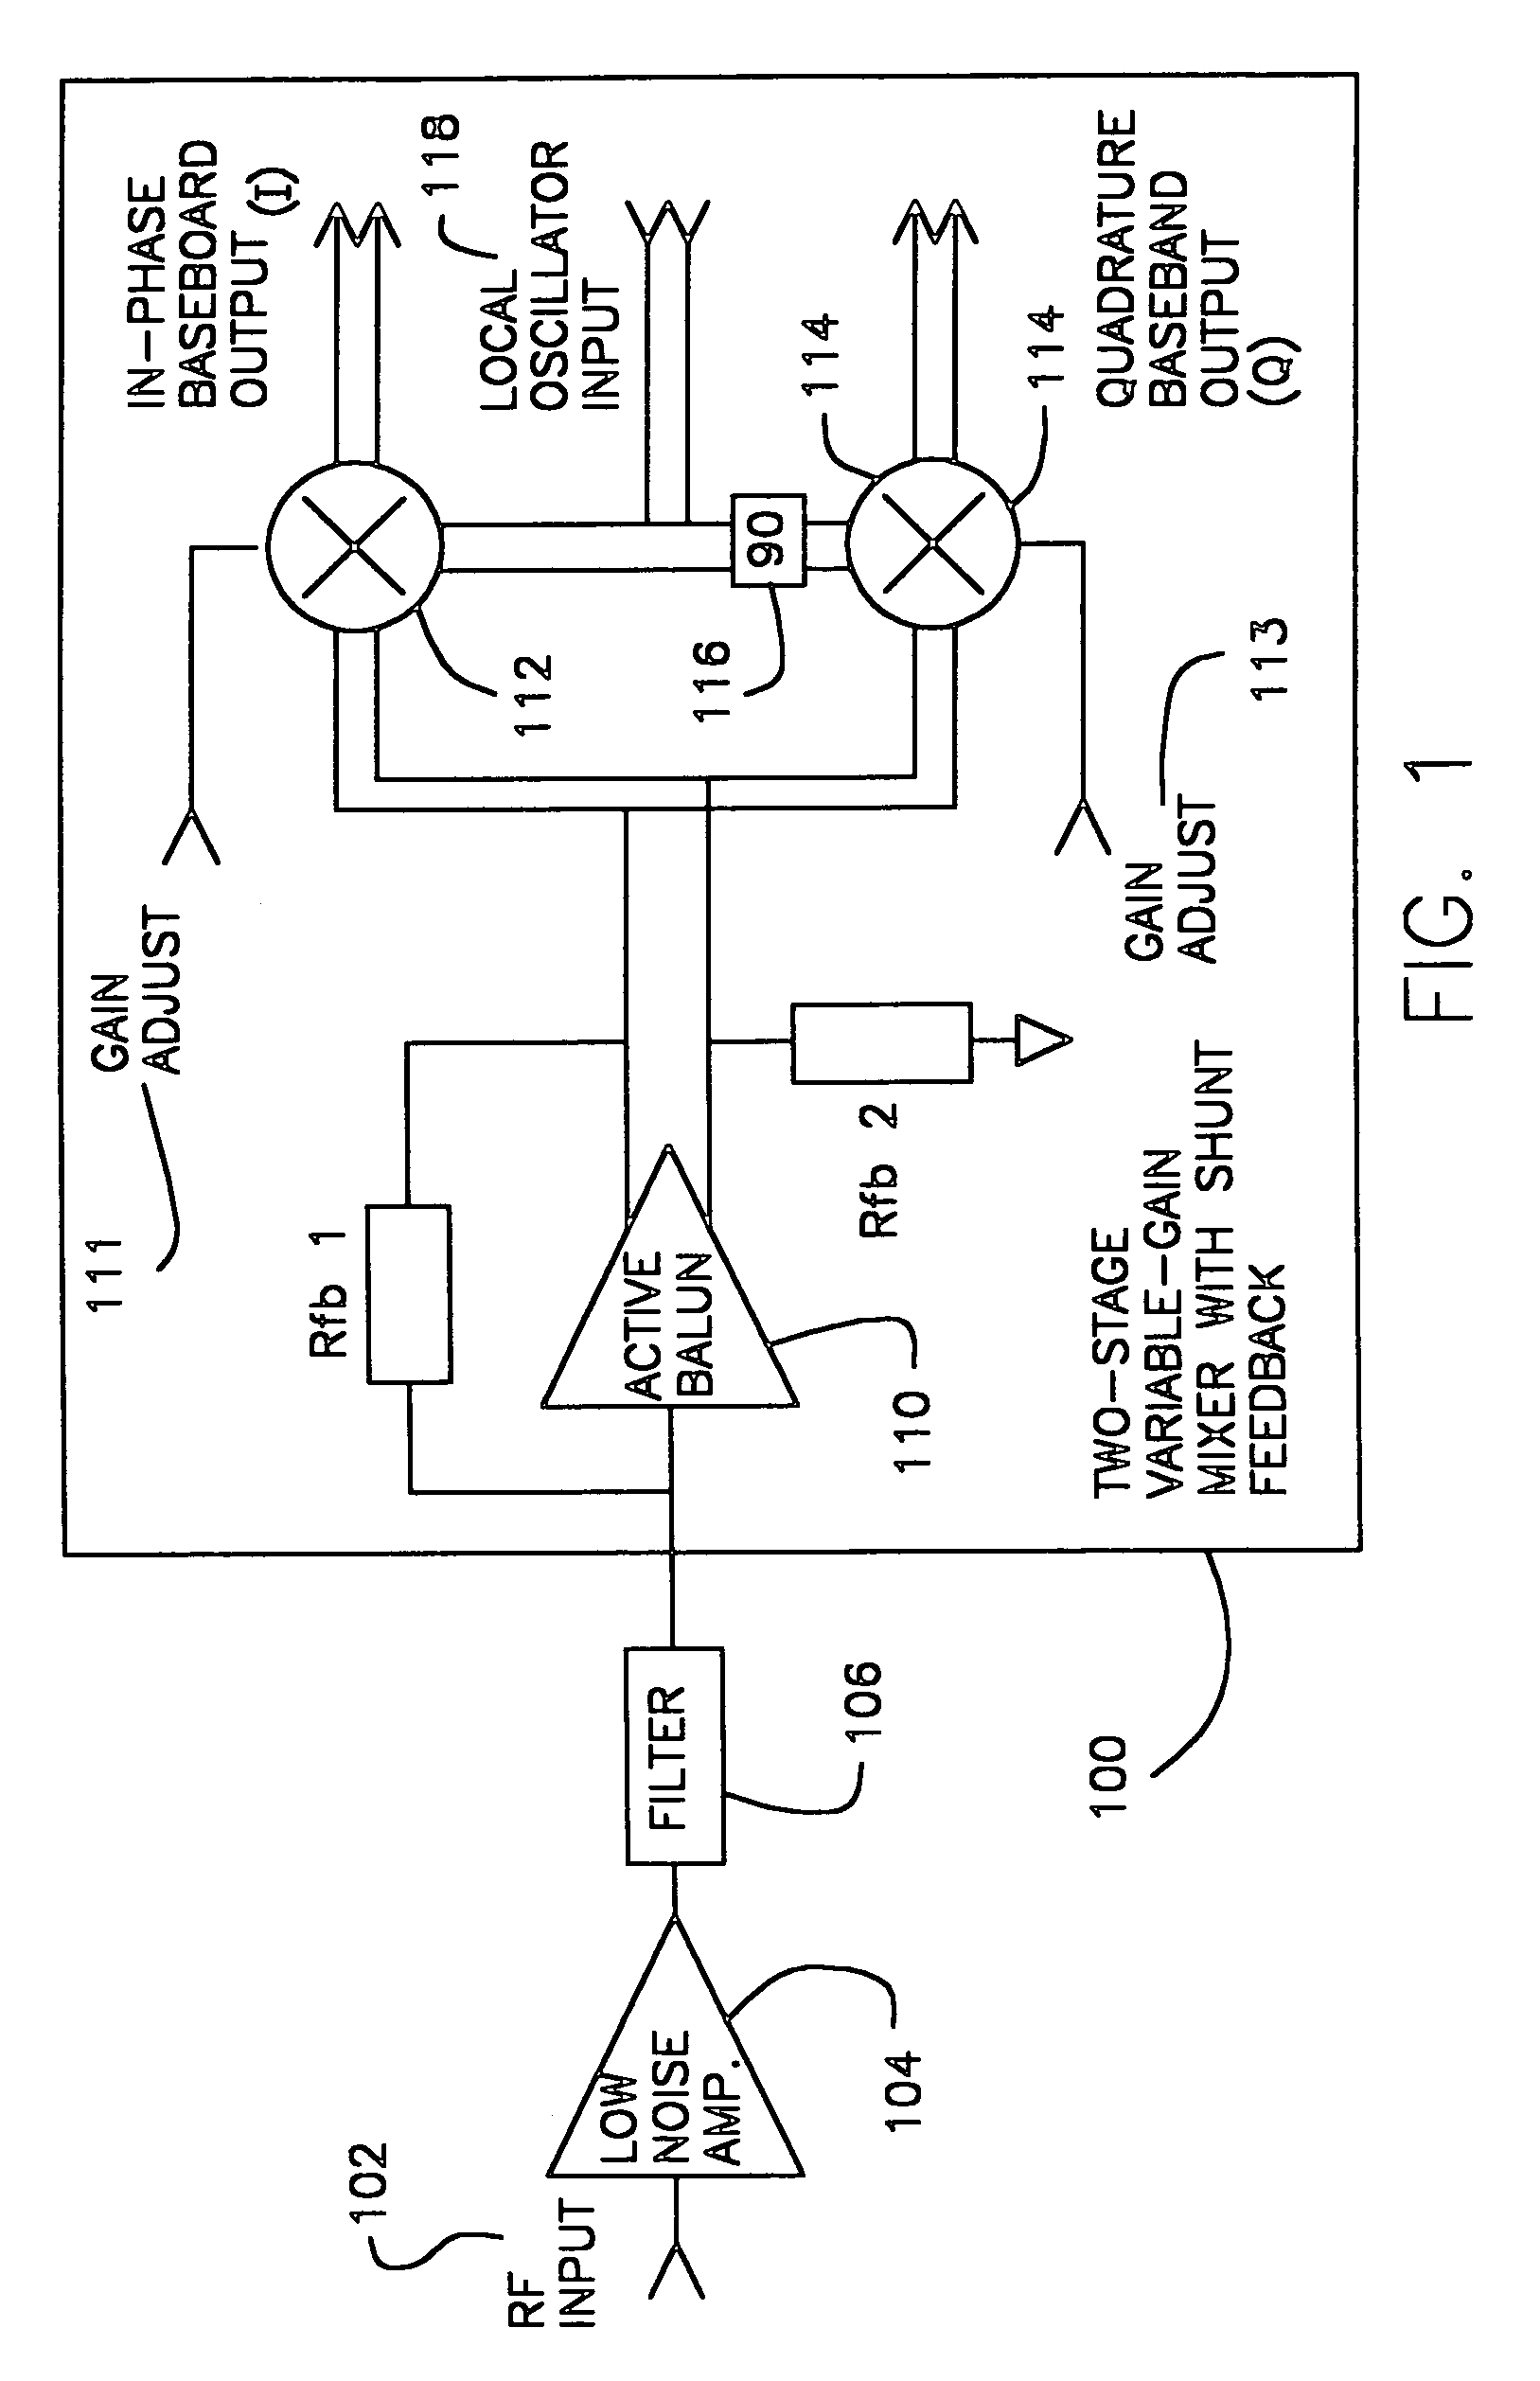 Two-stage variable-gain mixer employing shunt feedback